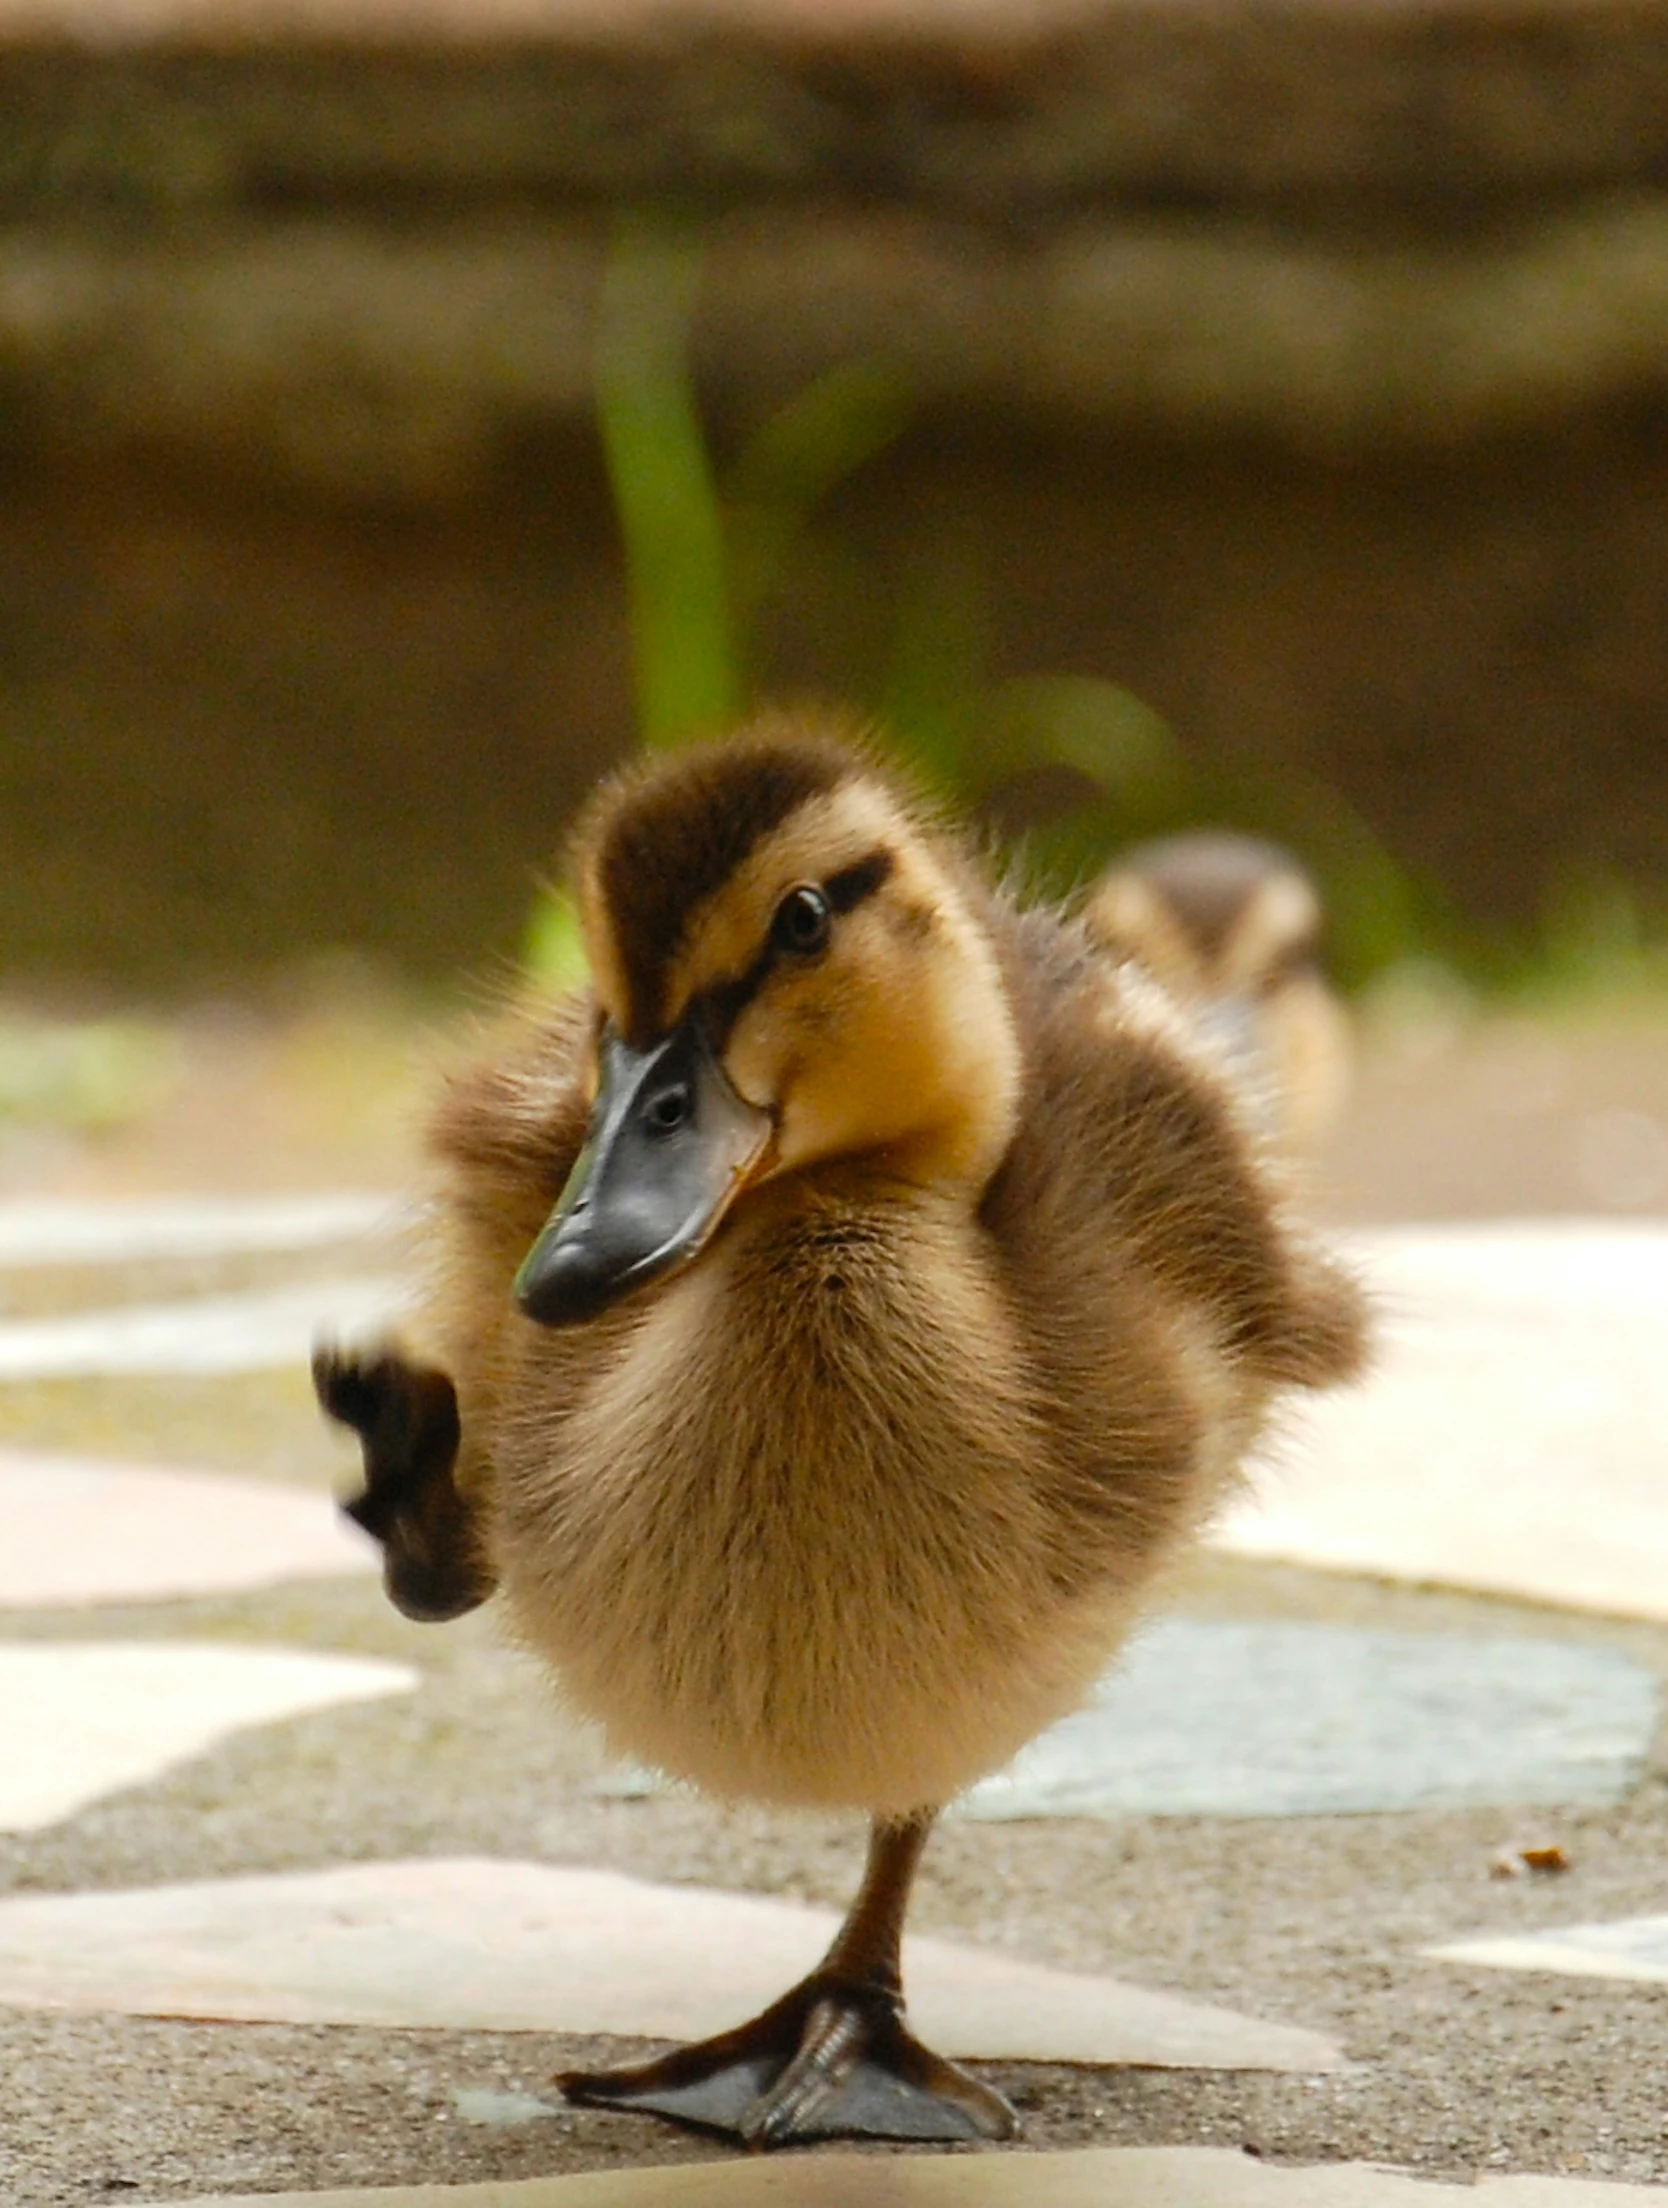 a baby duck is standing on the edge of a tile walkway